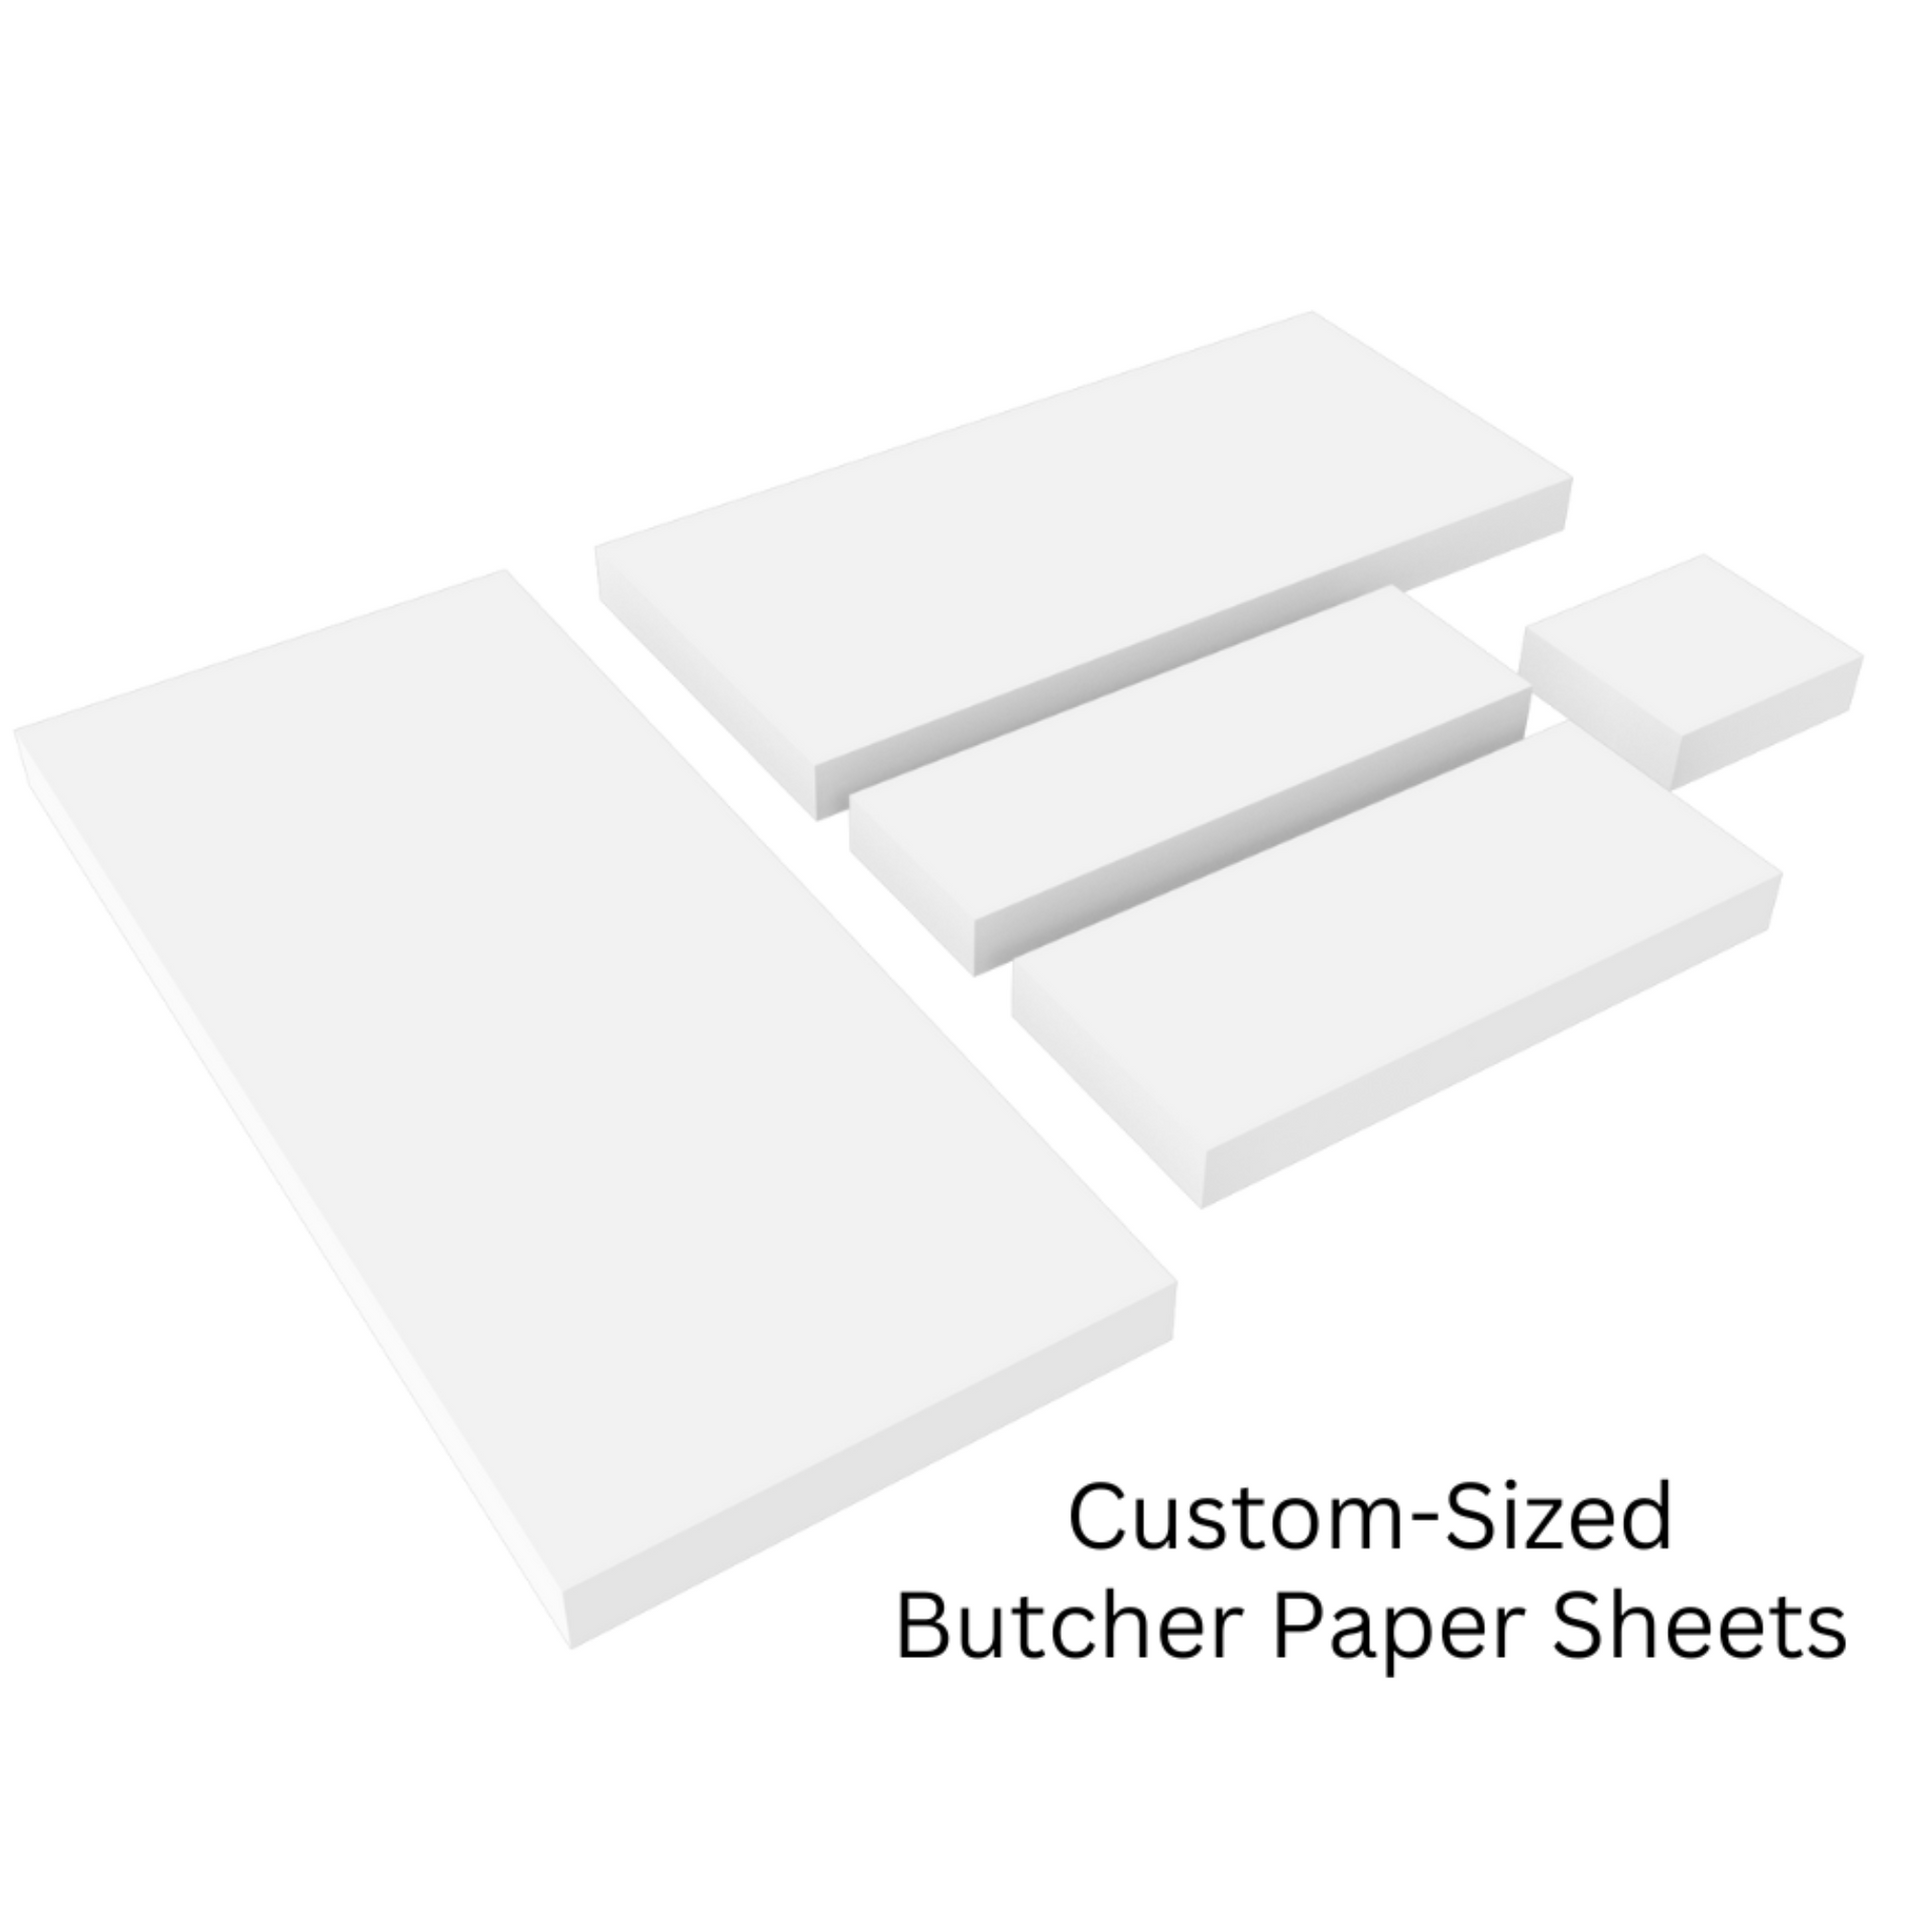 Precut Butcher Paper Sheets Fits Oven Mitts (2 sizes) for Sublimation –